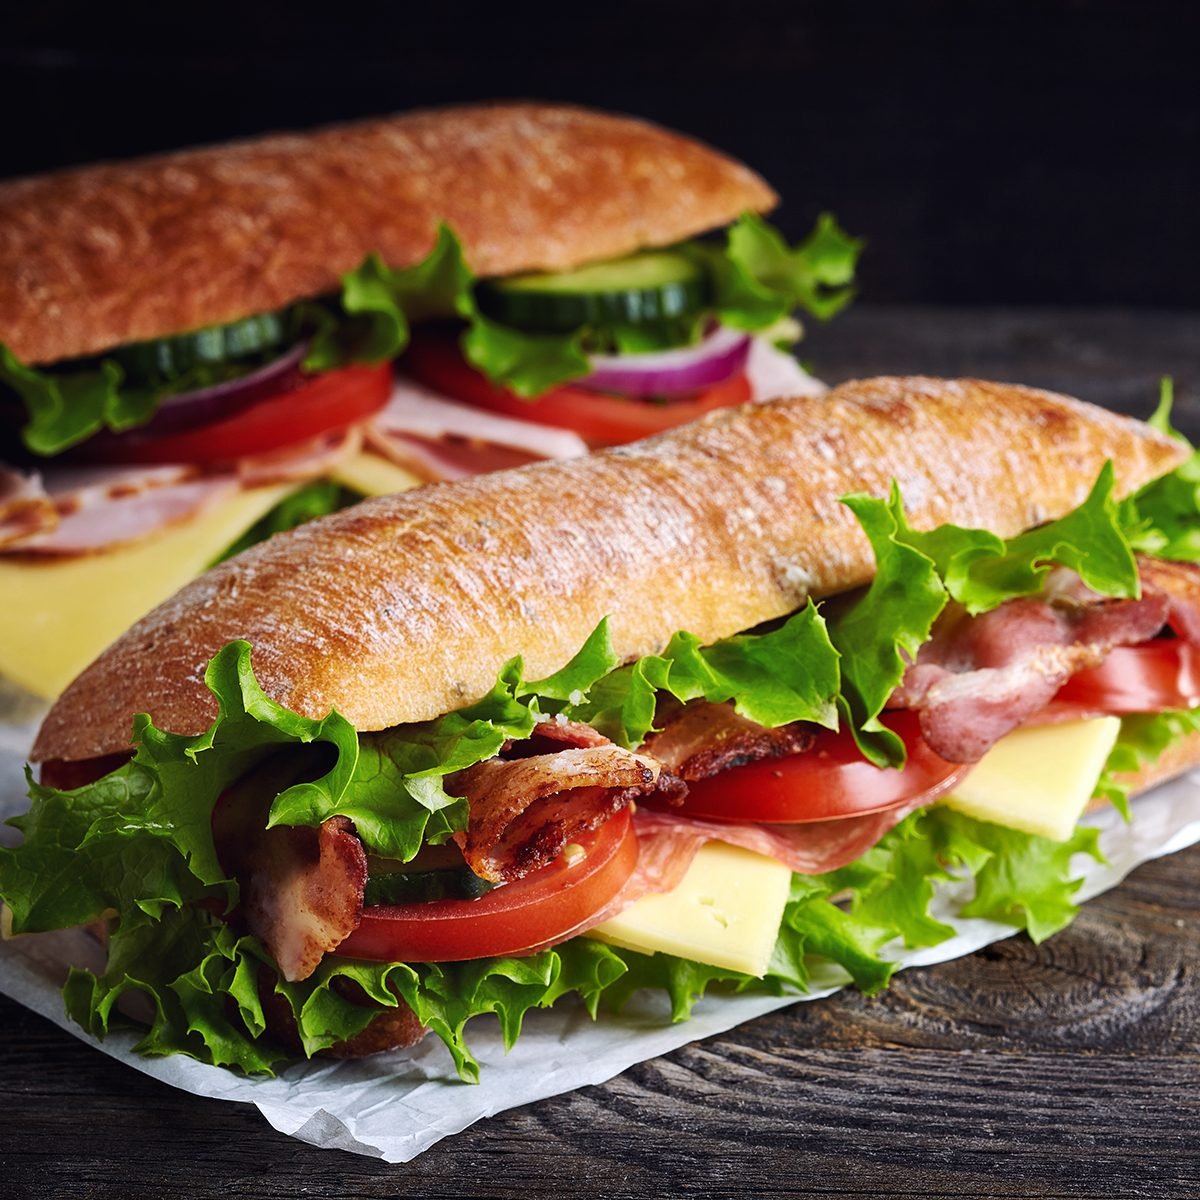 Two fresh submarine sandwiches with ham, cheese, bacon, tomatoes, lettuce, cucumbers and onions on dark wooden background